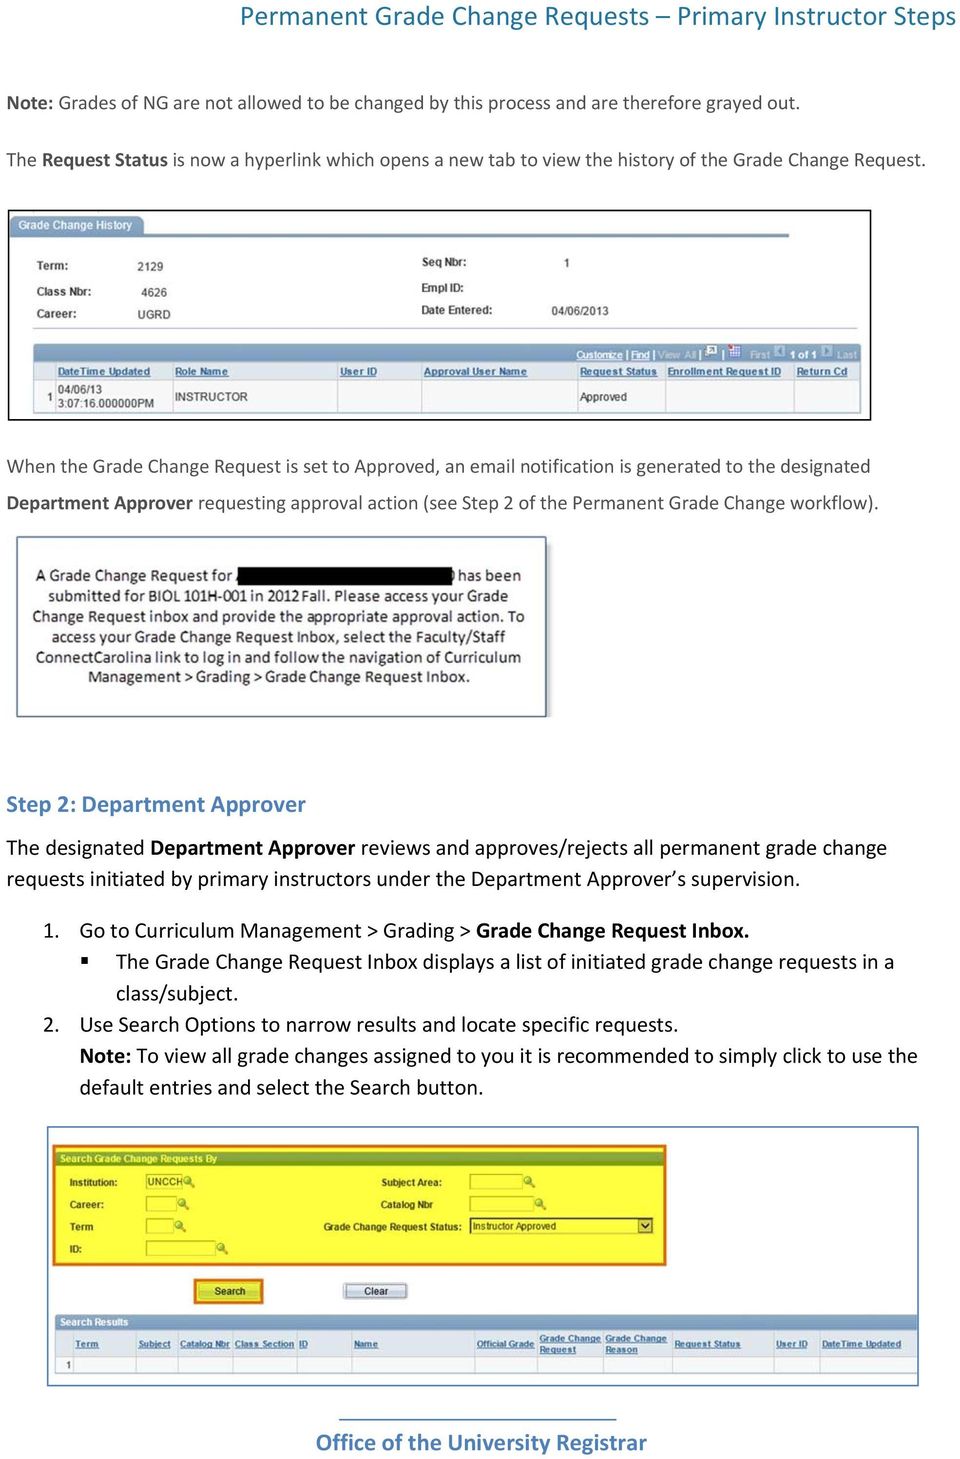 When the Grade Change Request is set to Approved, an email notification is generated to the designated Department Approver requesting approval action (see Step 2 of the Permanent Grade Change